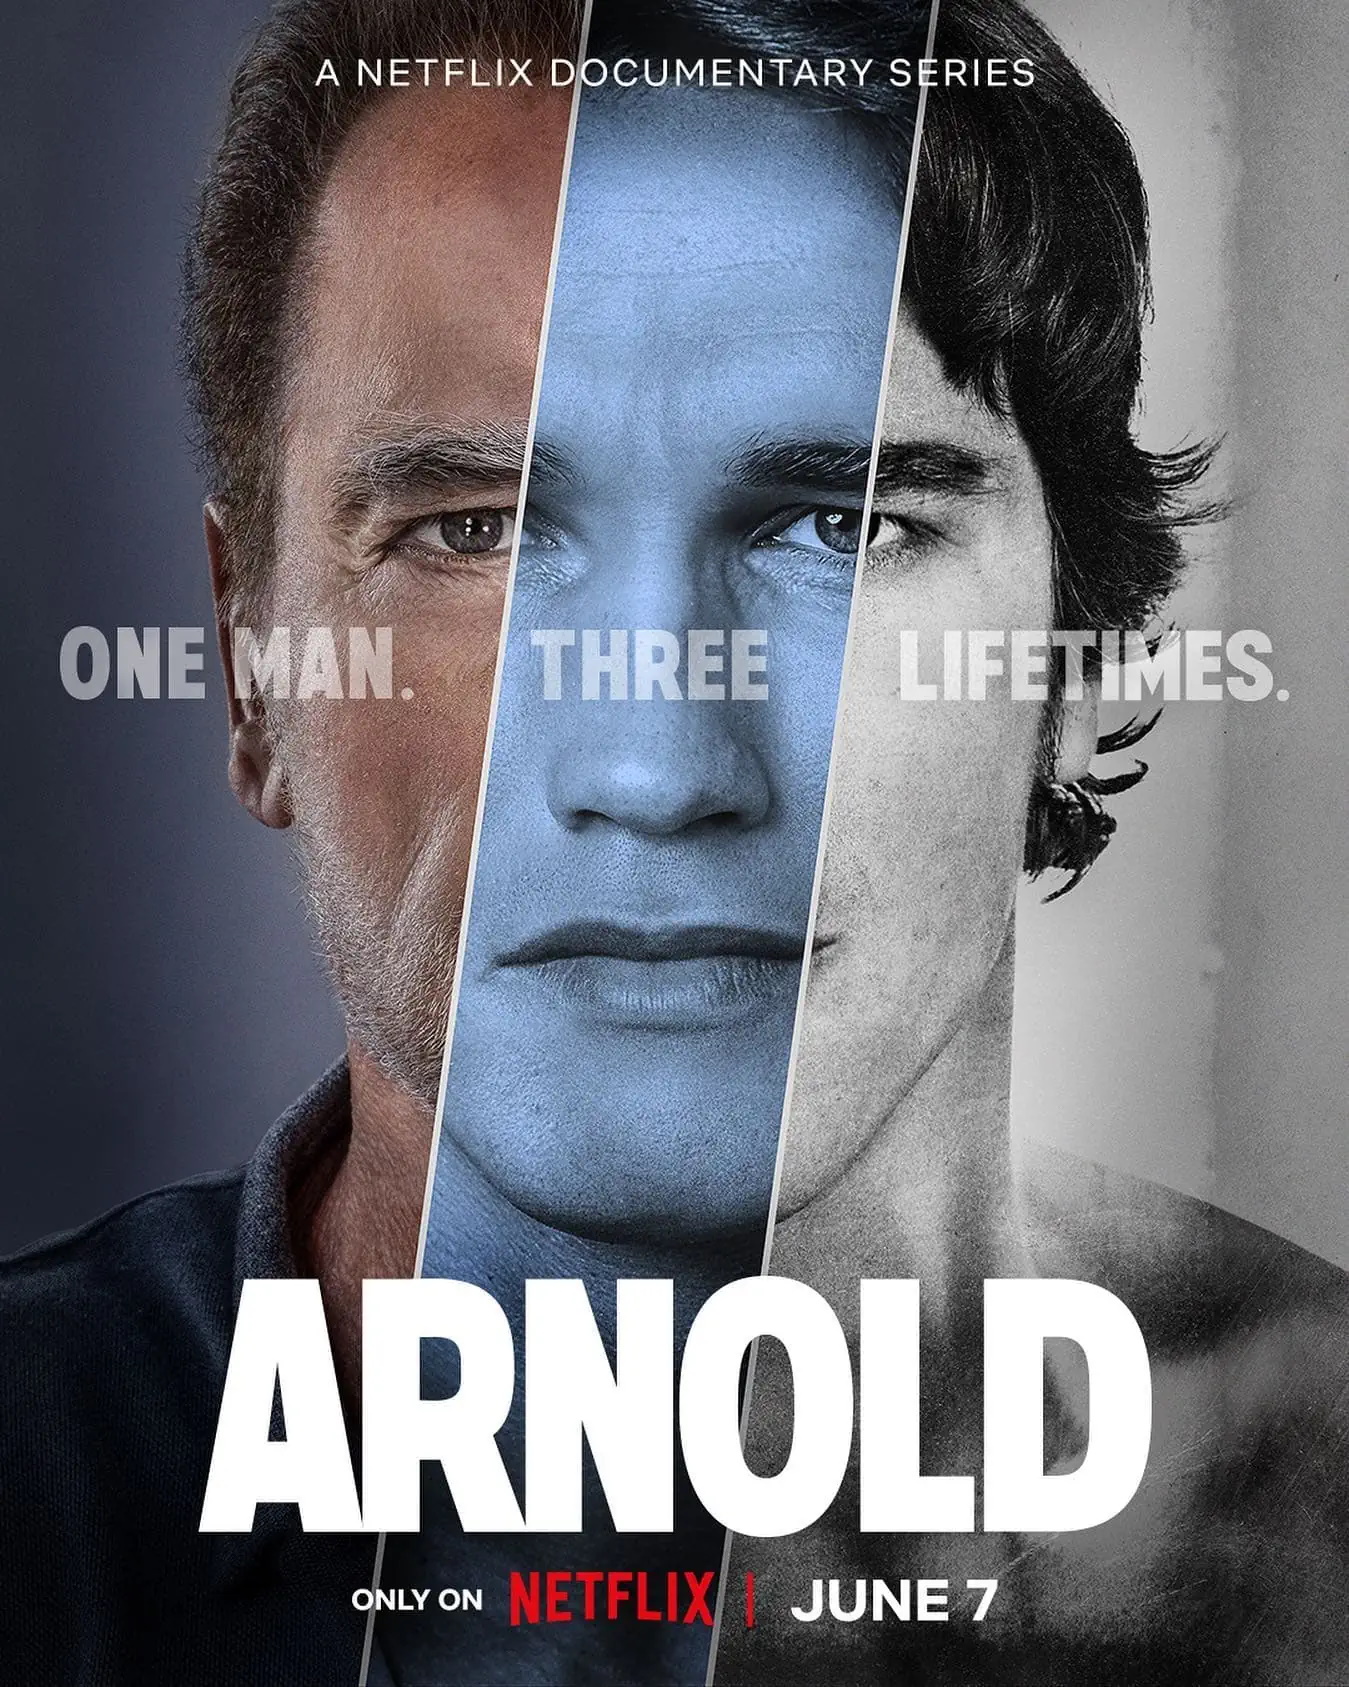 The Arnold Documentary